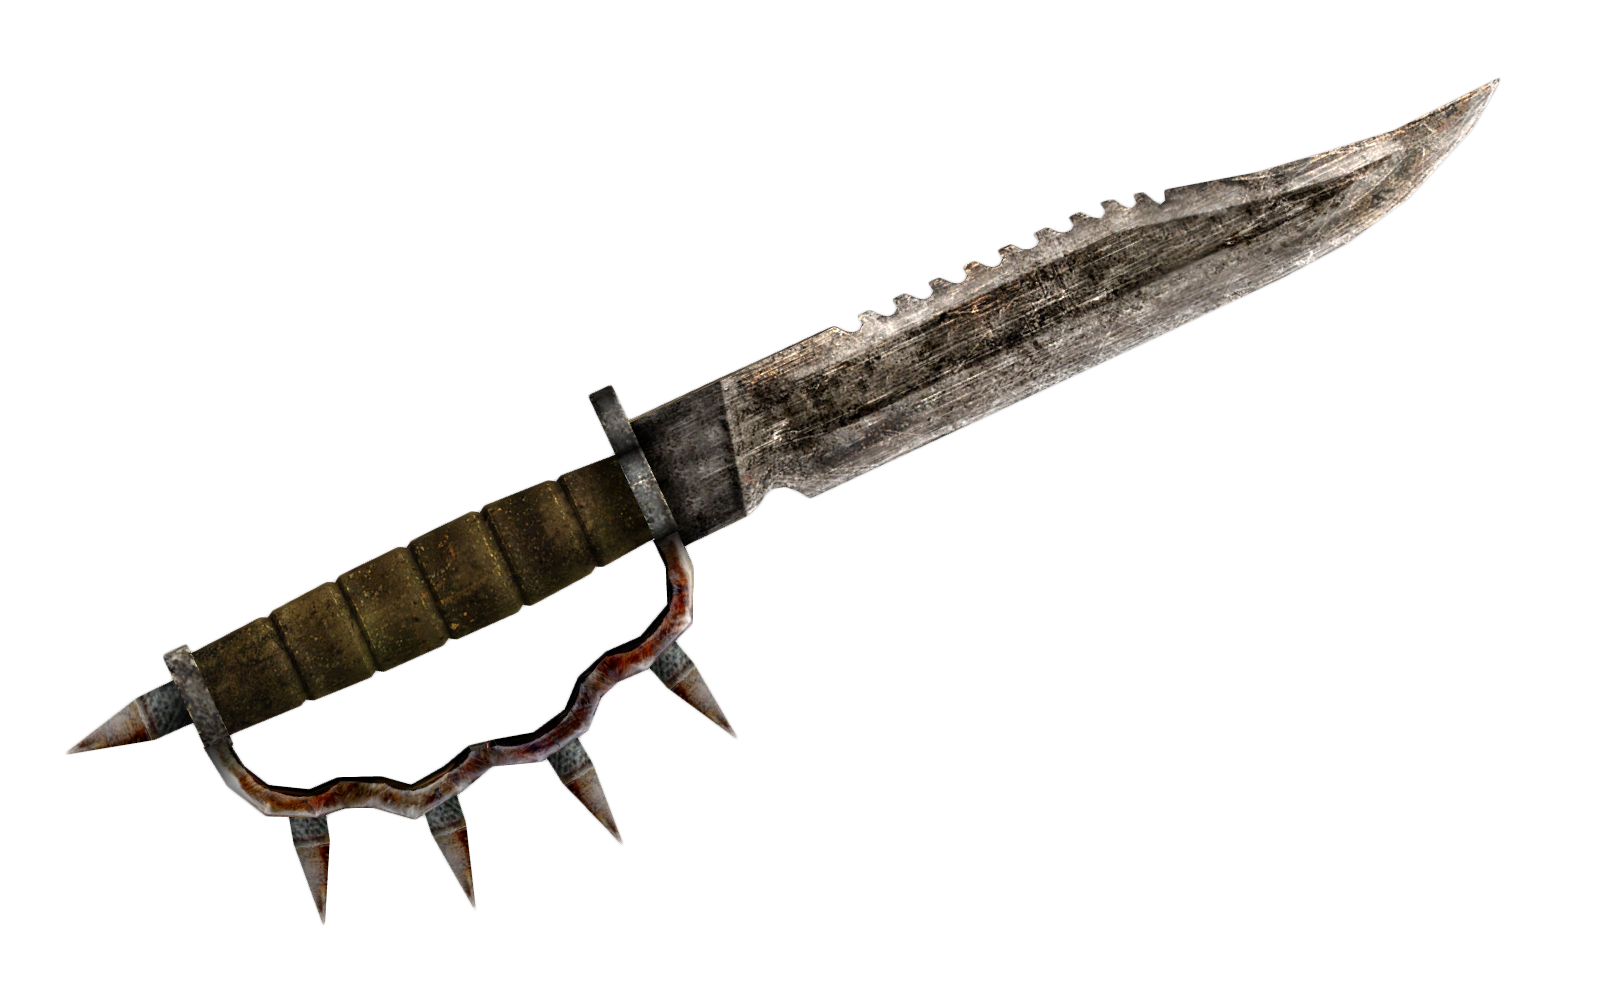 http://static3.wikia.nocookie.net/__cb20110826141333/fallout/images/6/68/Trench_knife.png